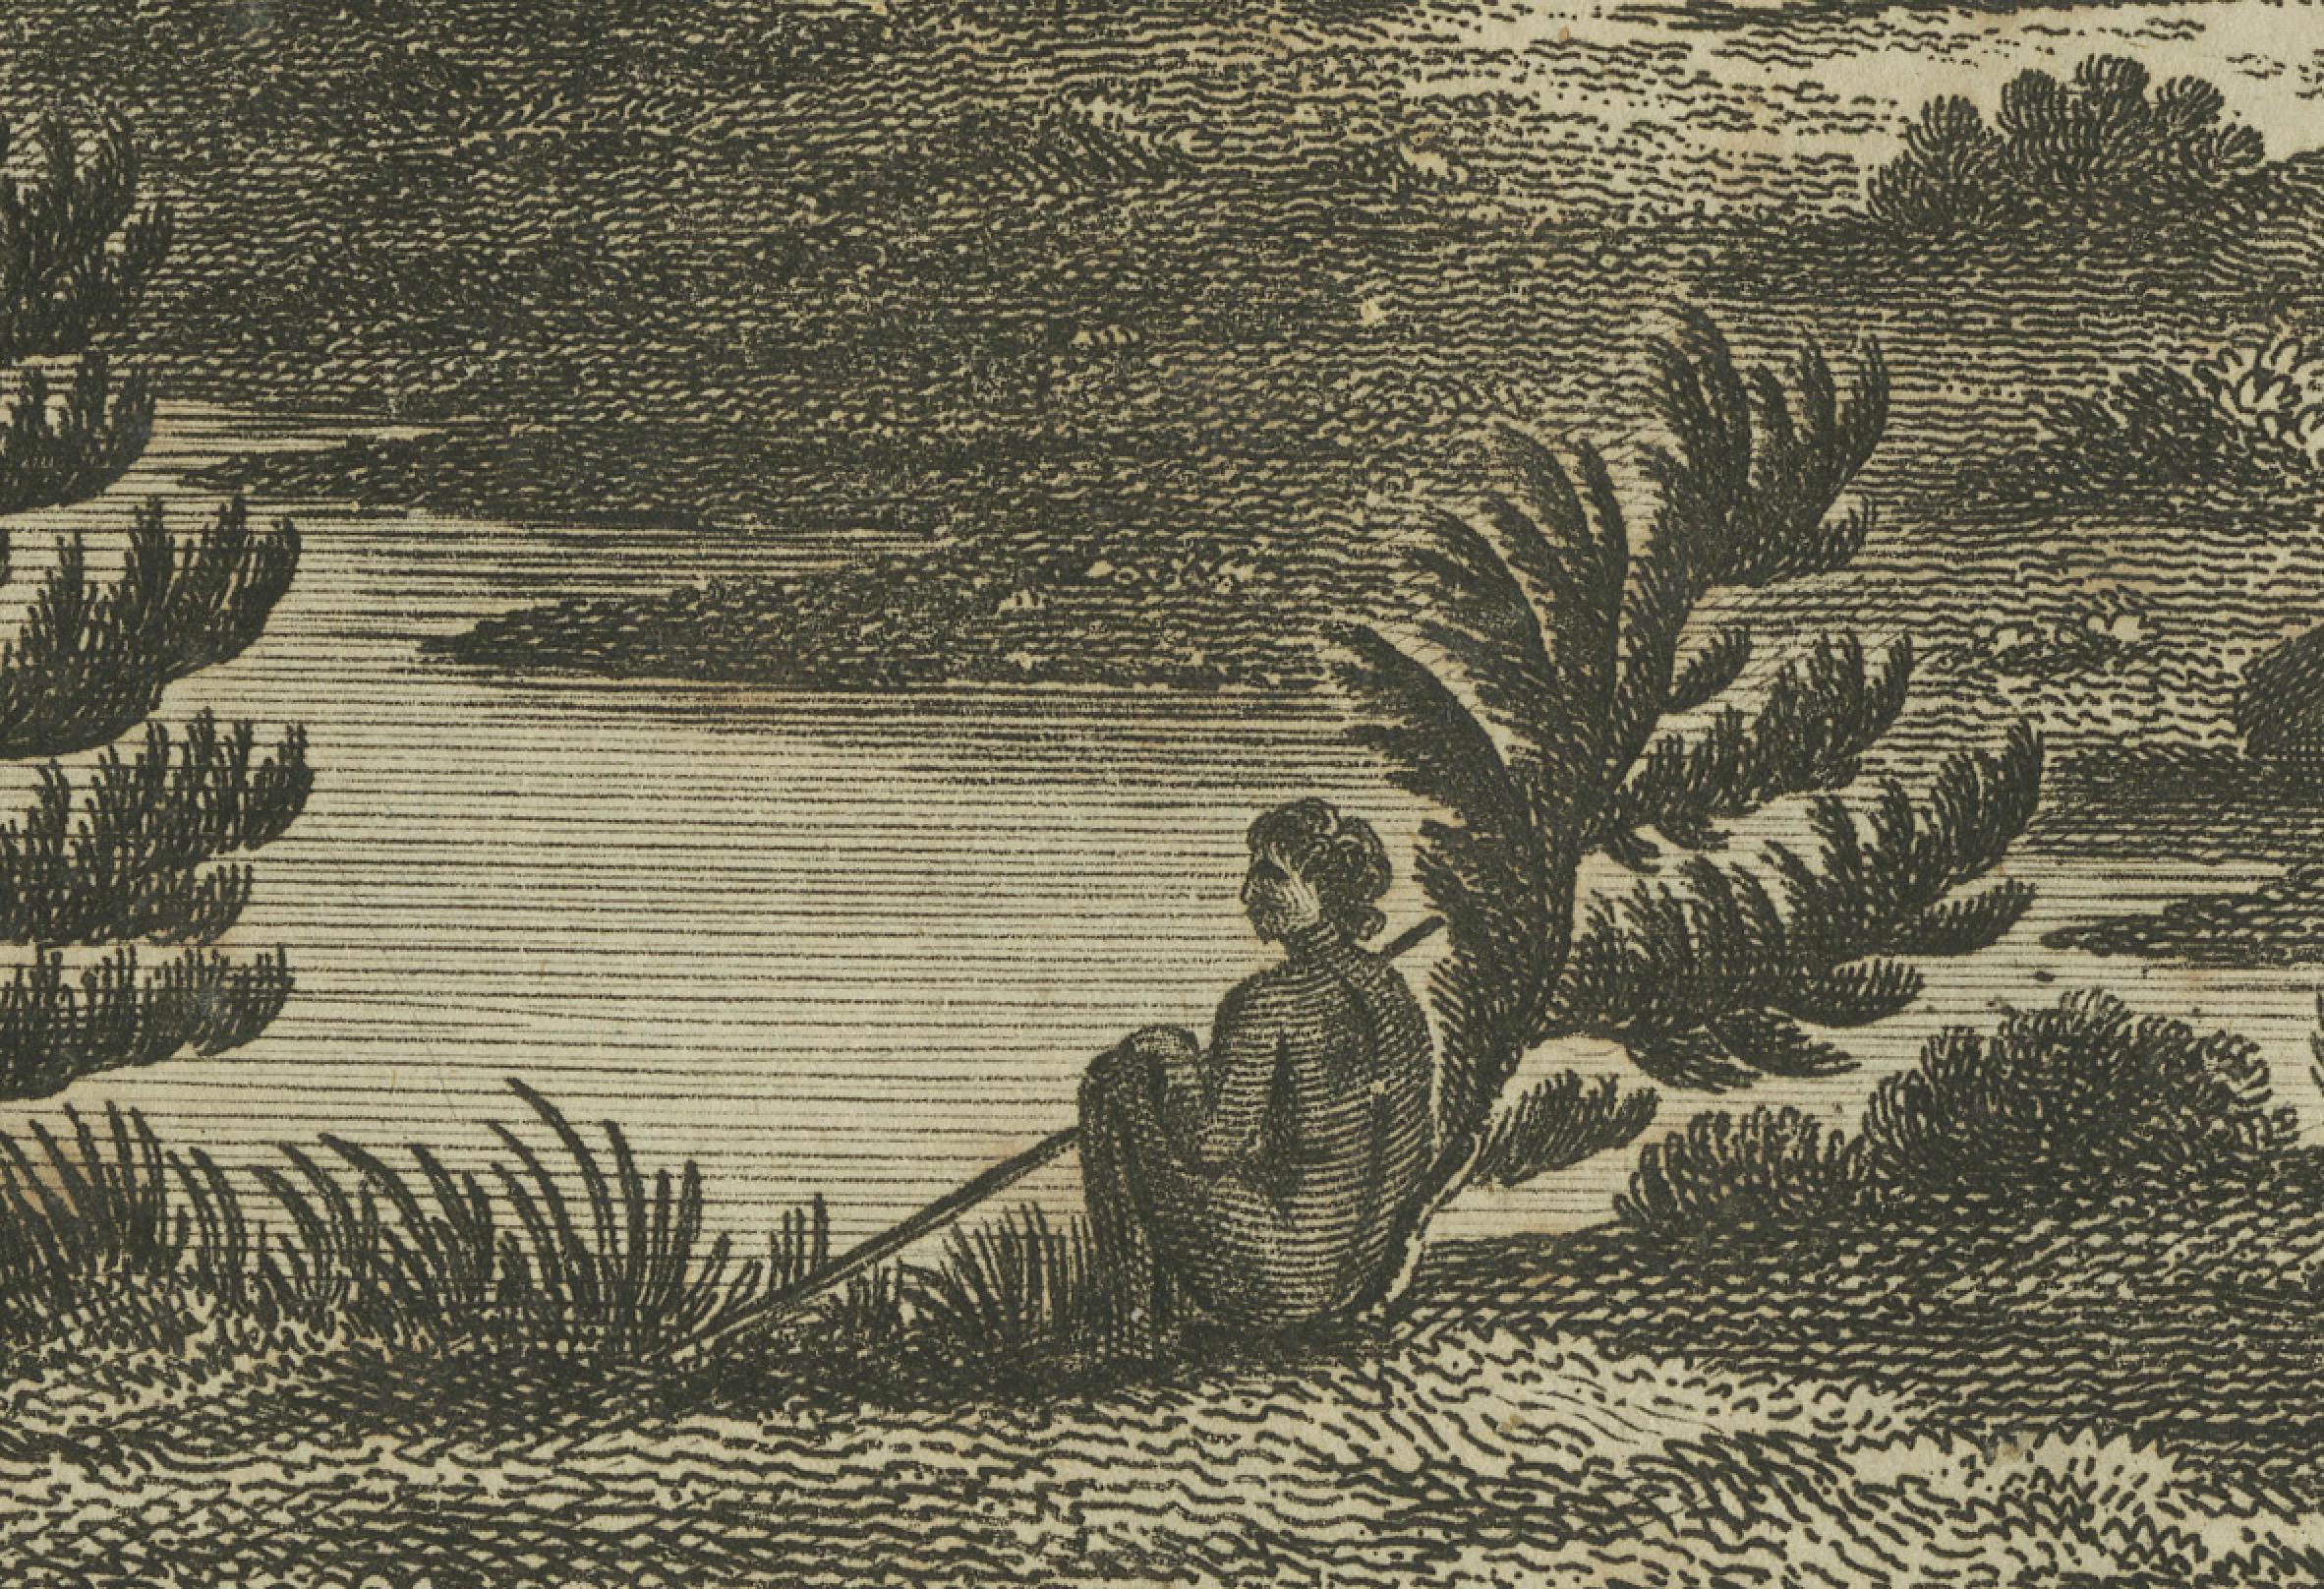 This image is an antique copper engraving with the title 